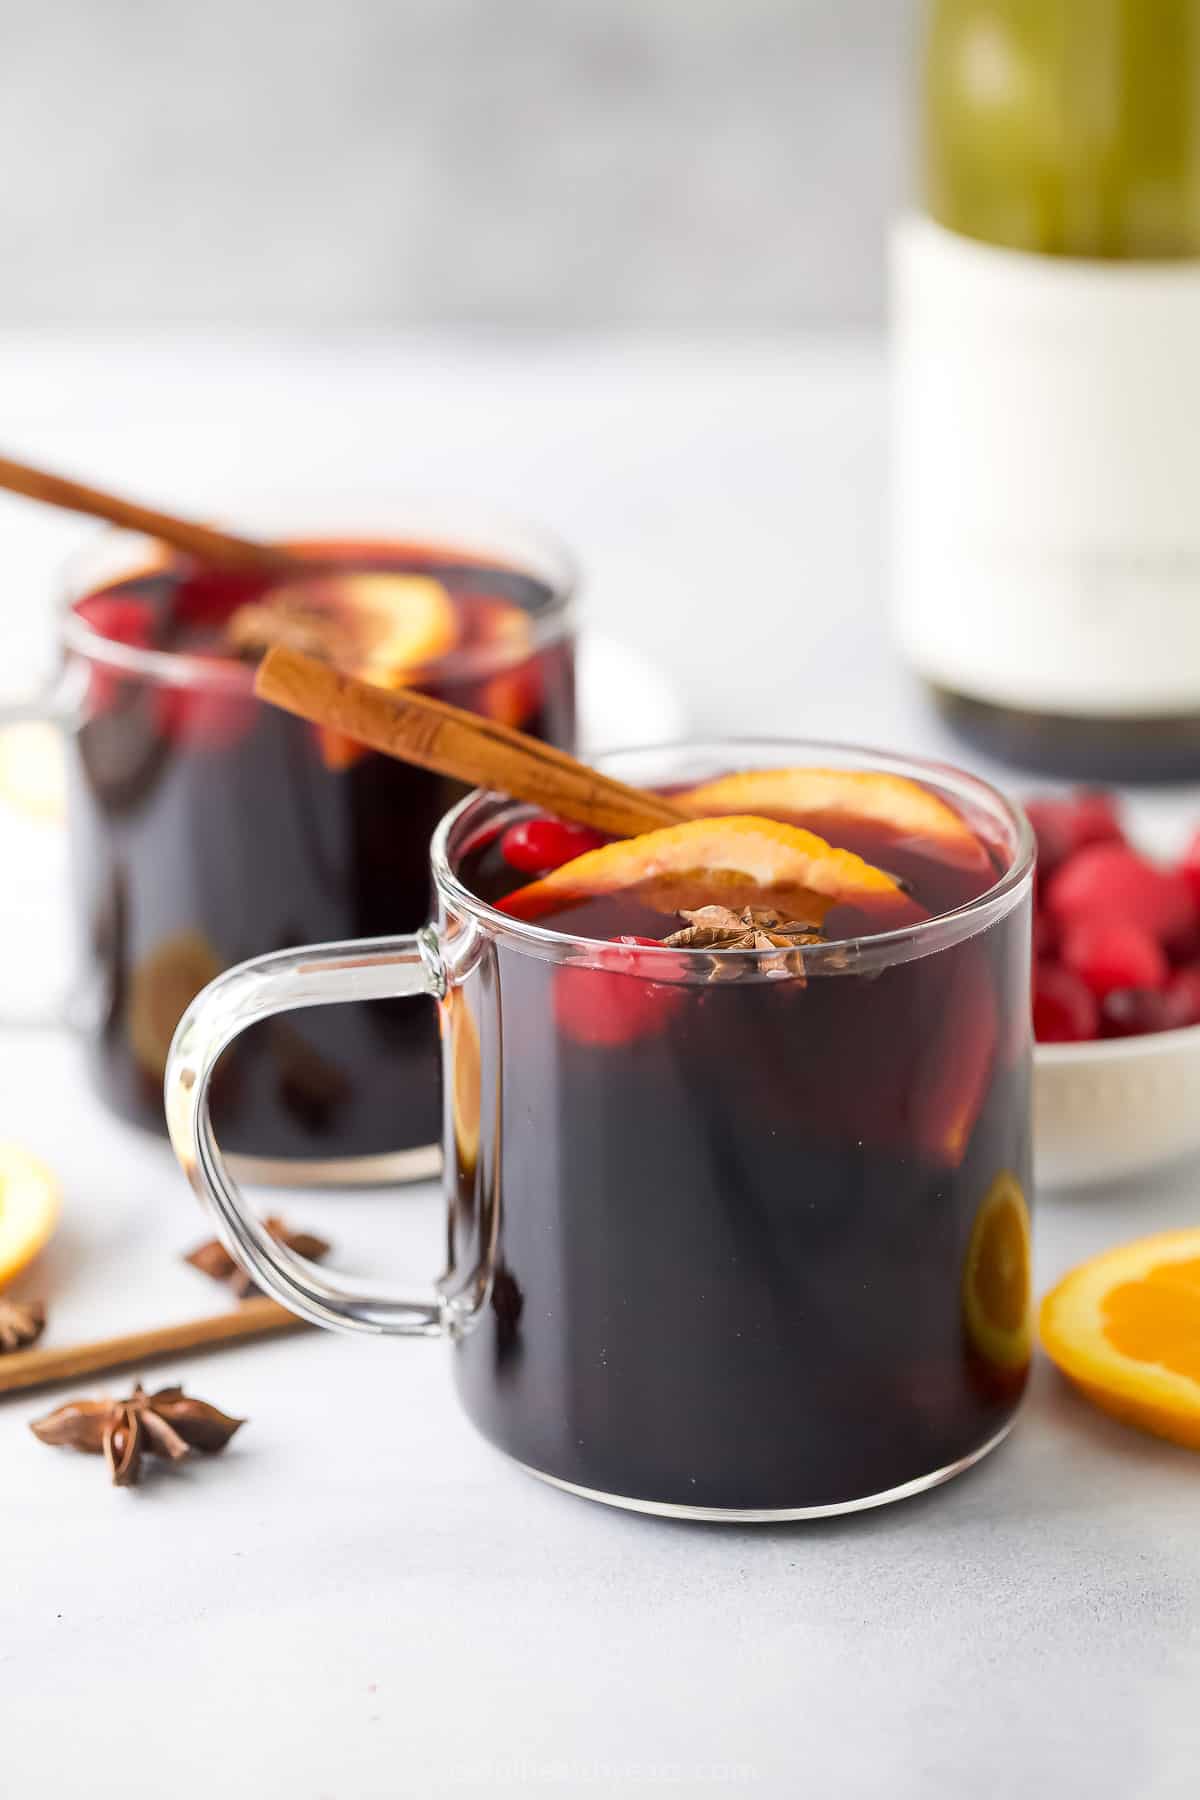 Warm ،liday drink in a gl، with sliced oranges and a cinnamon stick stirrer. 